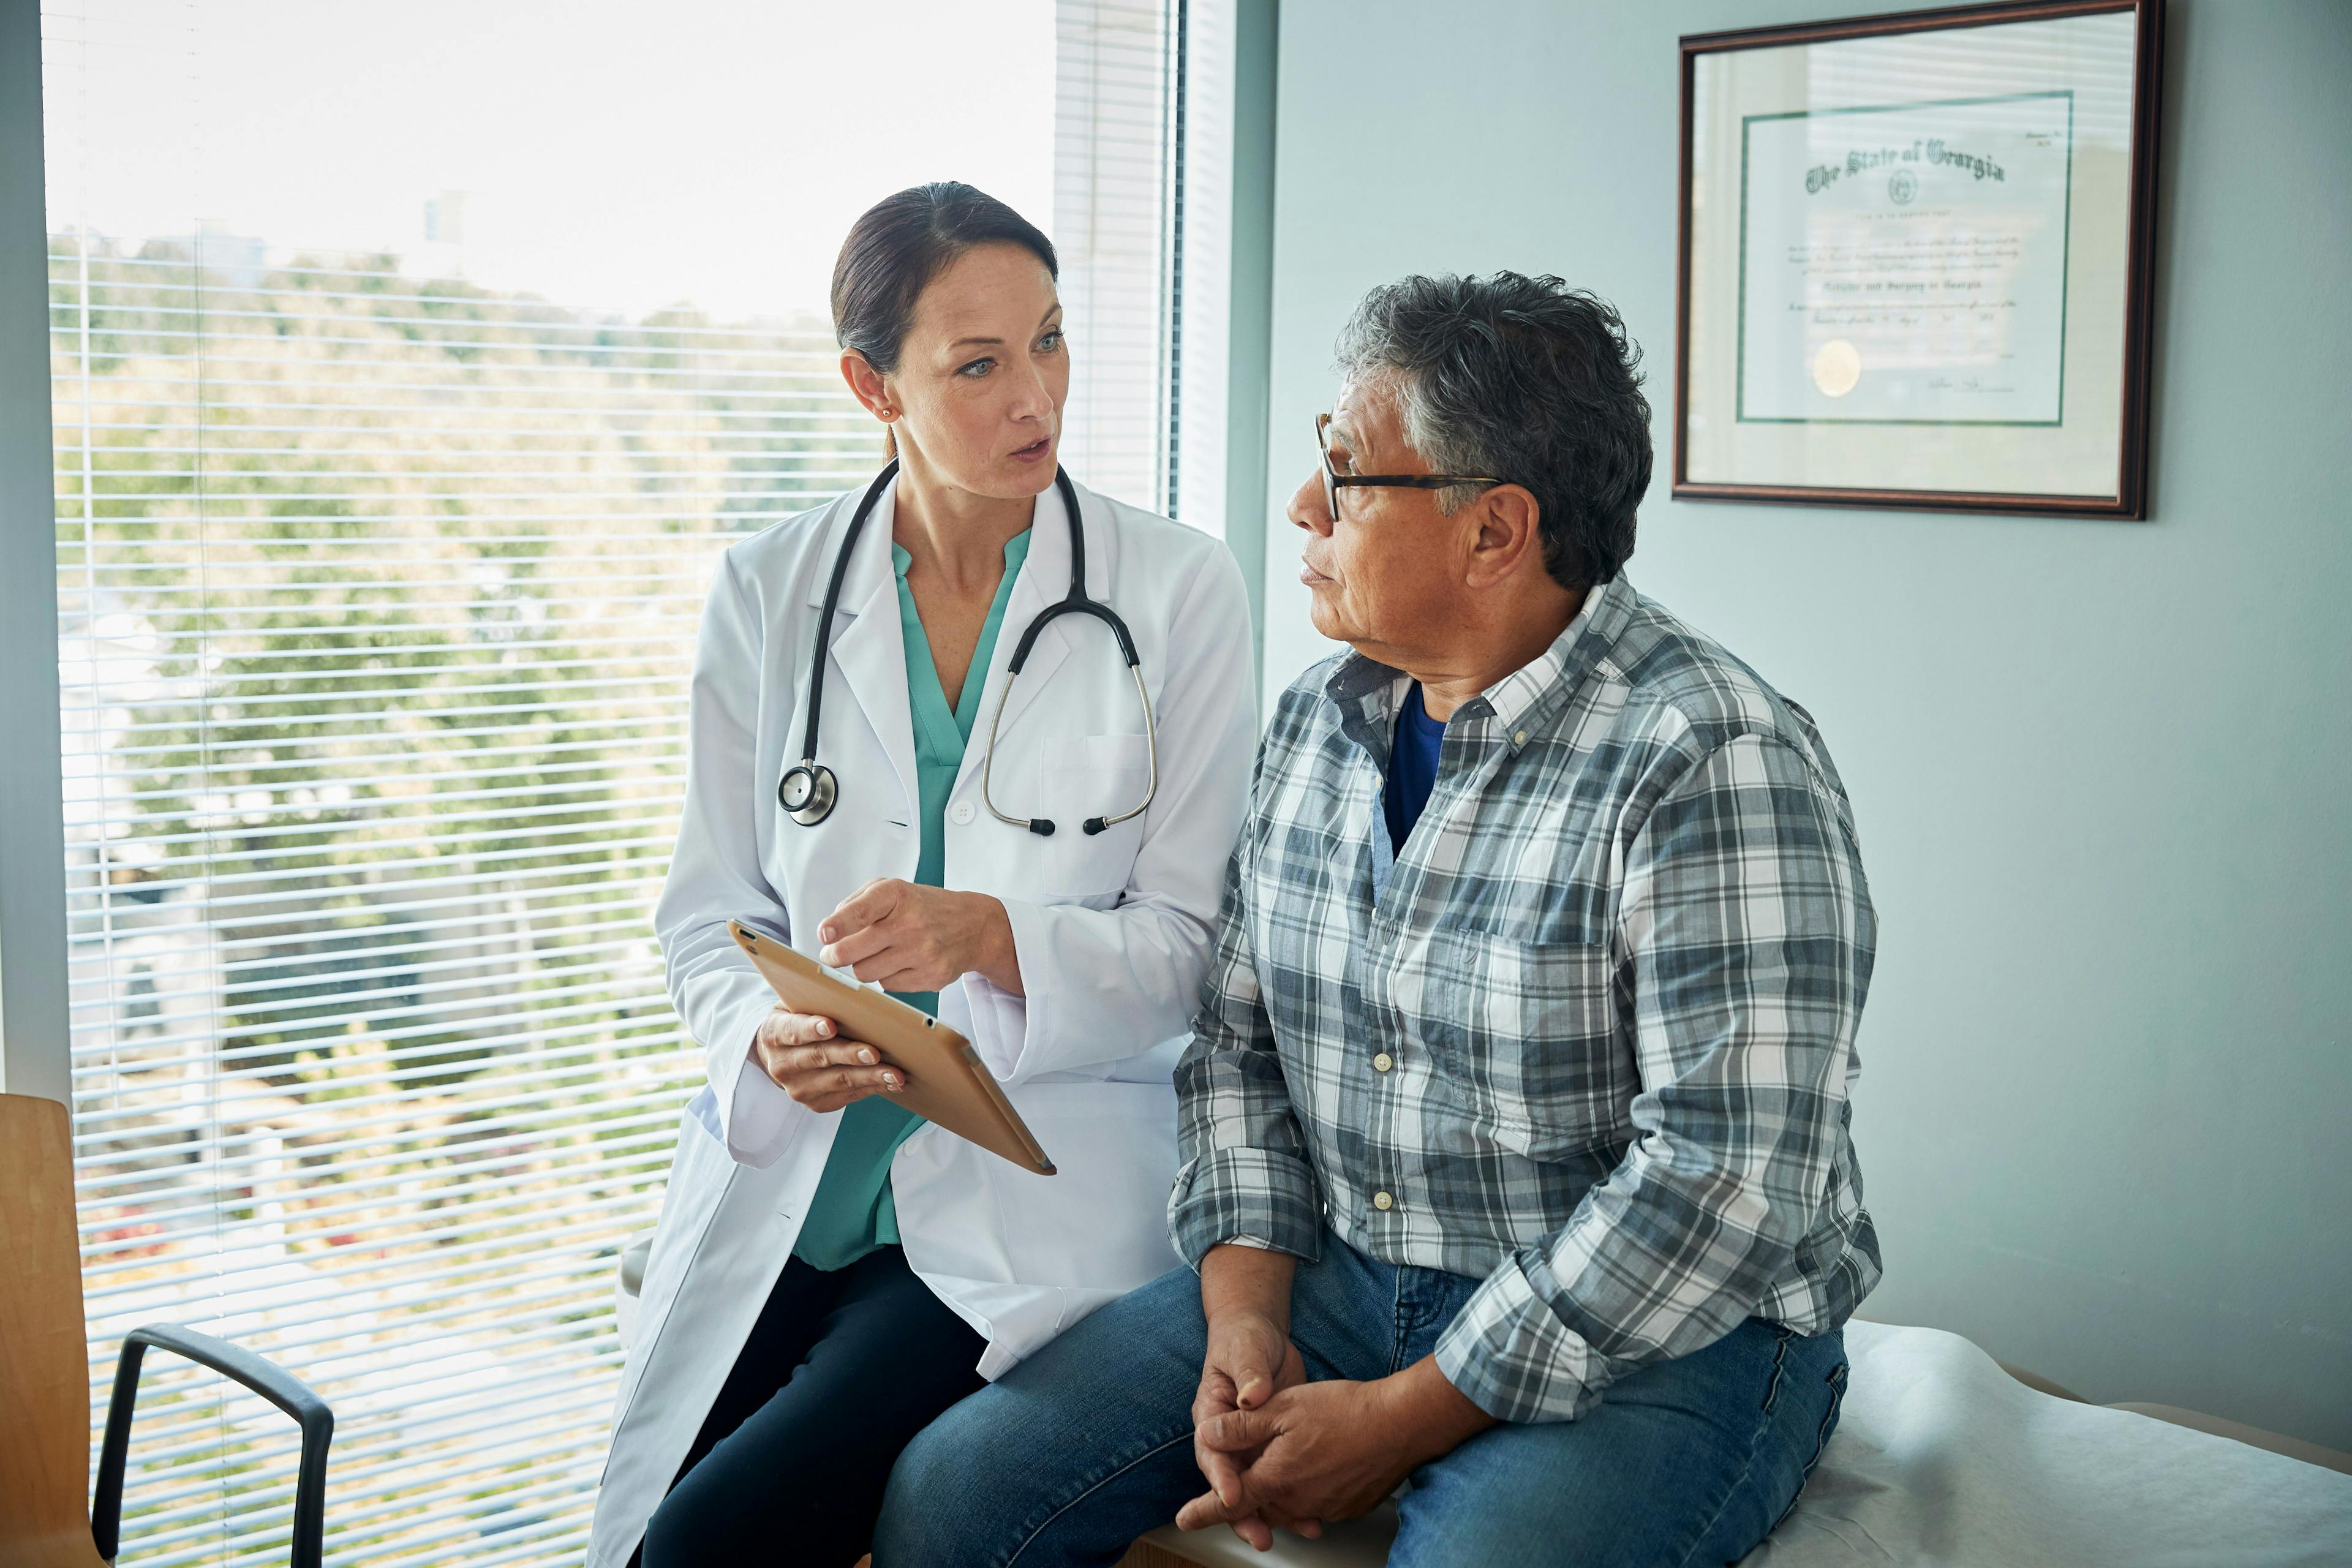 When providers focus on the value they create for the time that patients spend with them, they create better experiences, the authors suggest. (Image credit: ©Gregory Miller - stock.adobe.com)